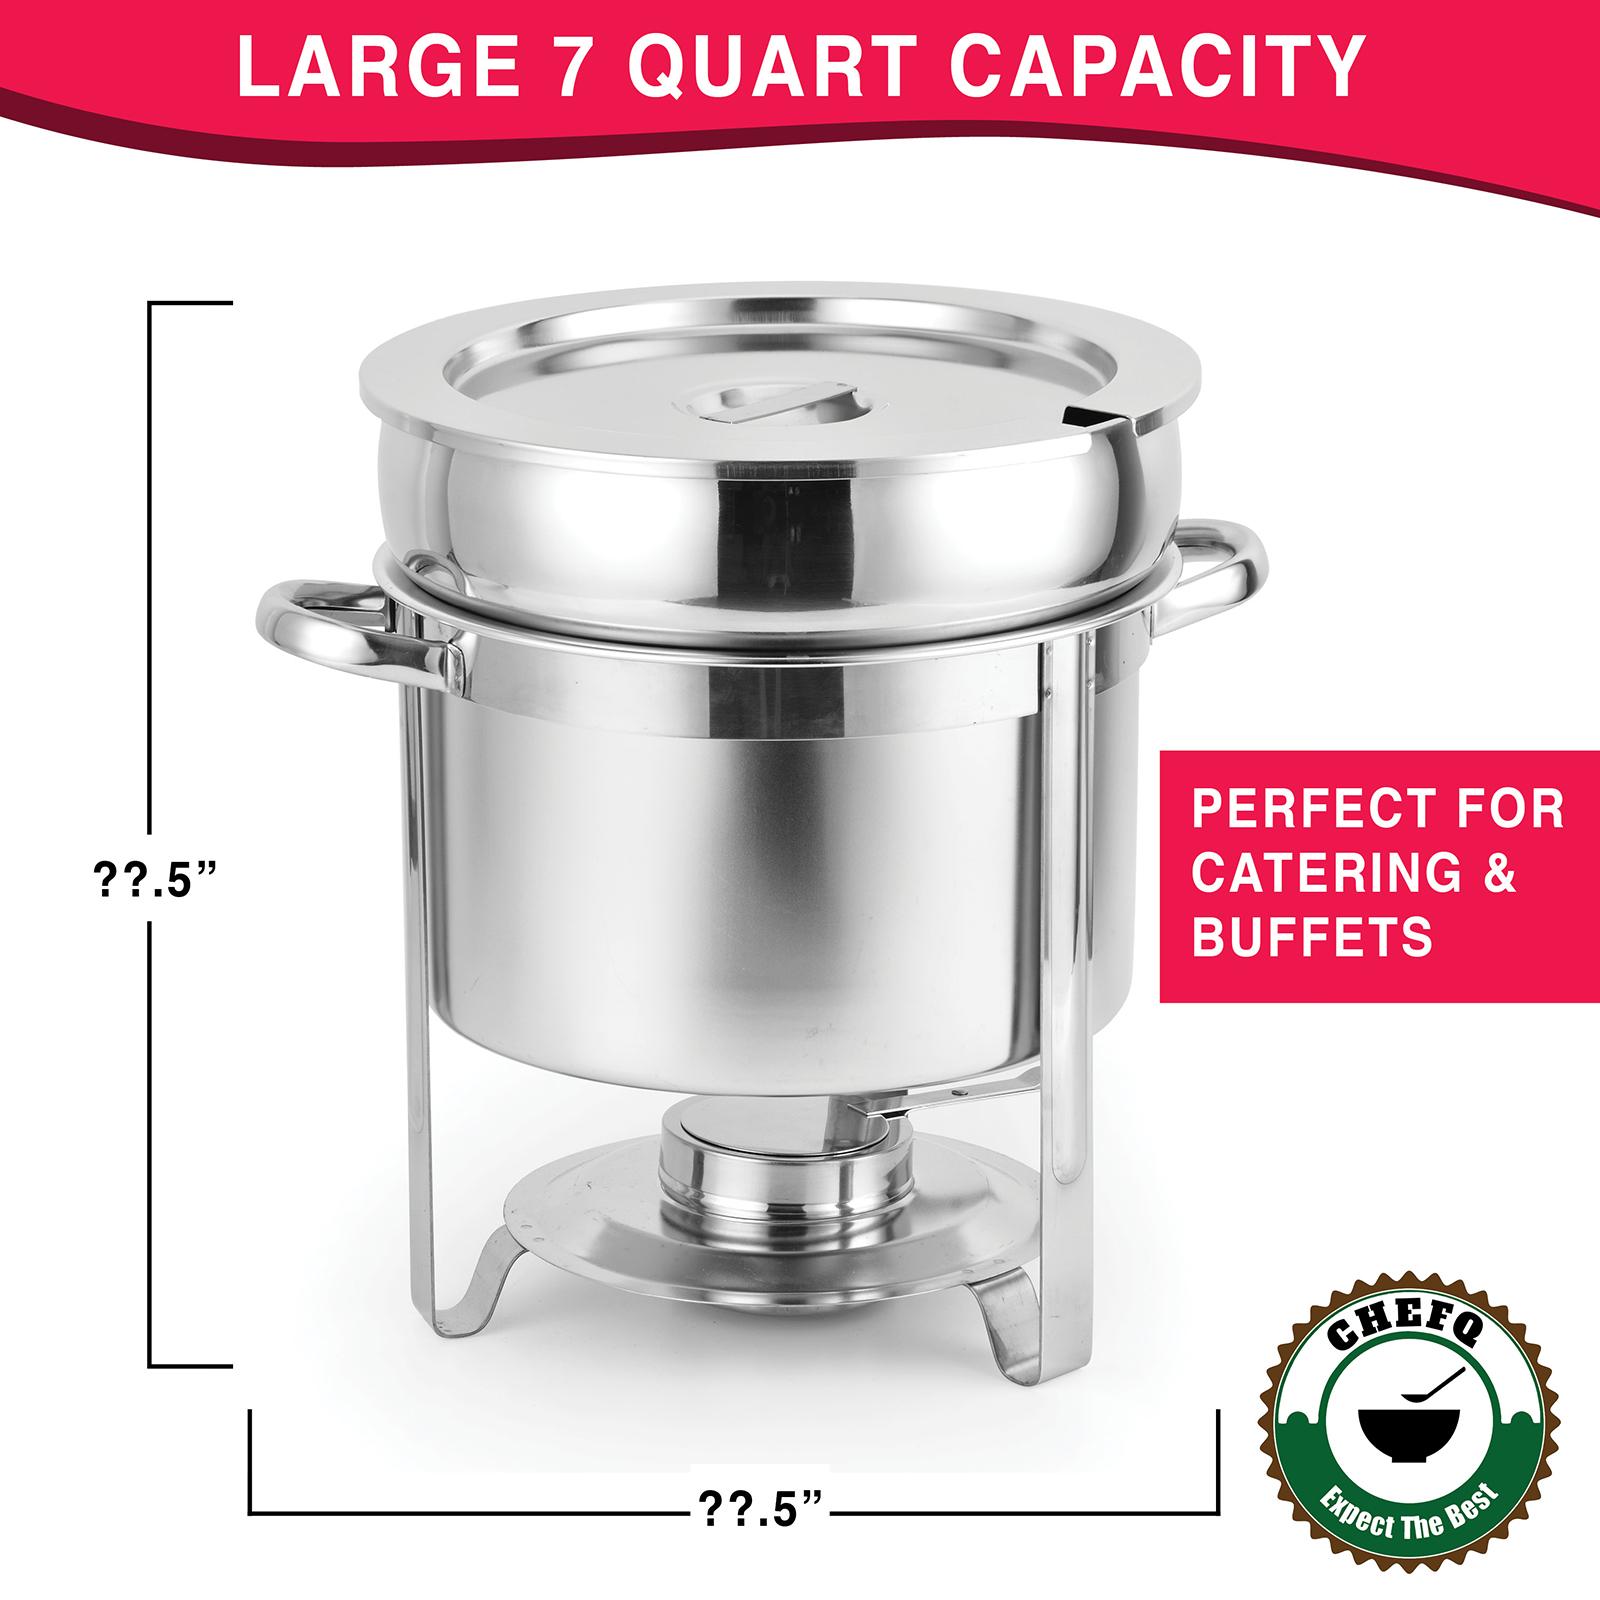 Soup Chafer Marmite Chafer Stainless Steel Buffet Set Warmer for Any Event or Party 7 Quart